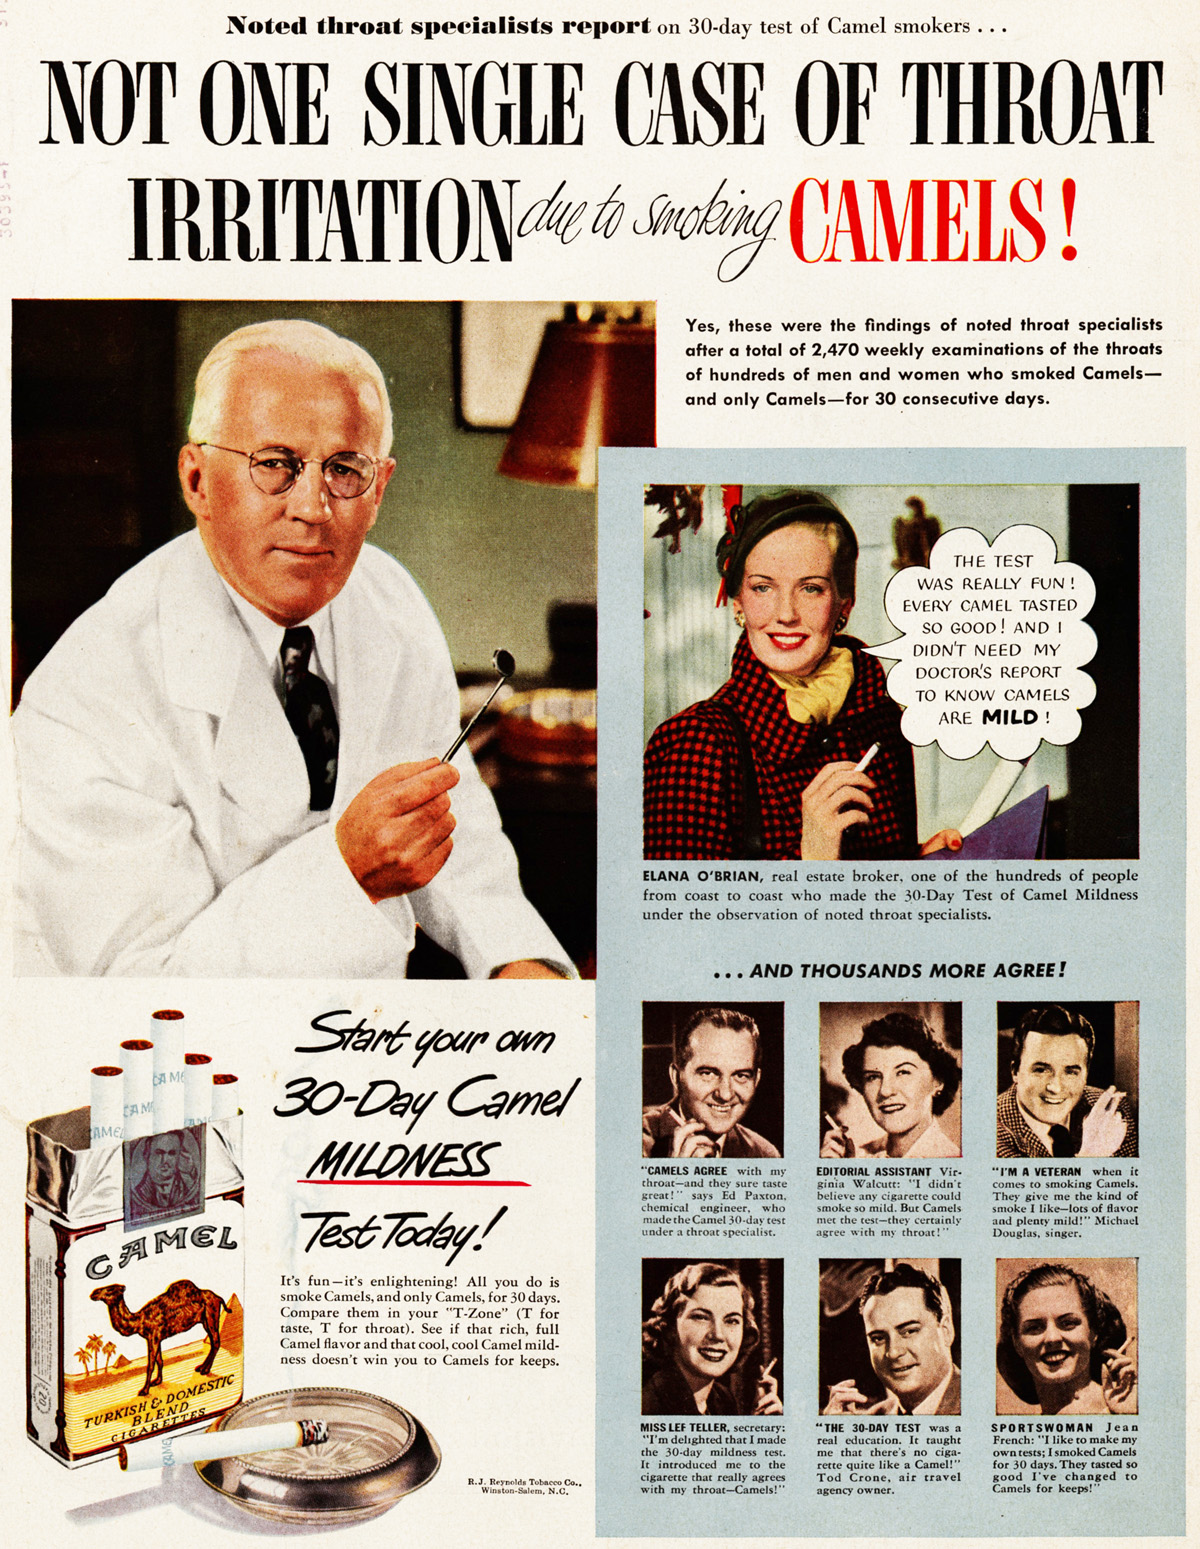 An old advertisement for cigarettes.